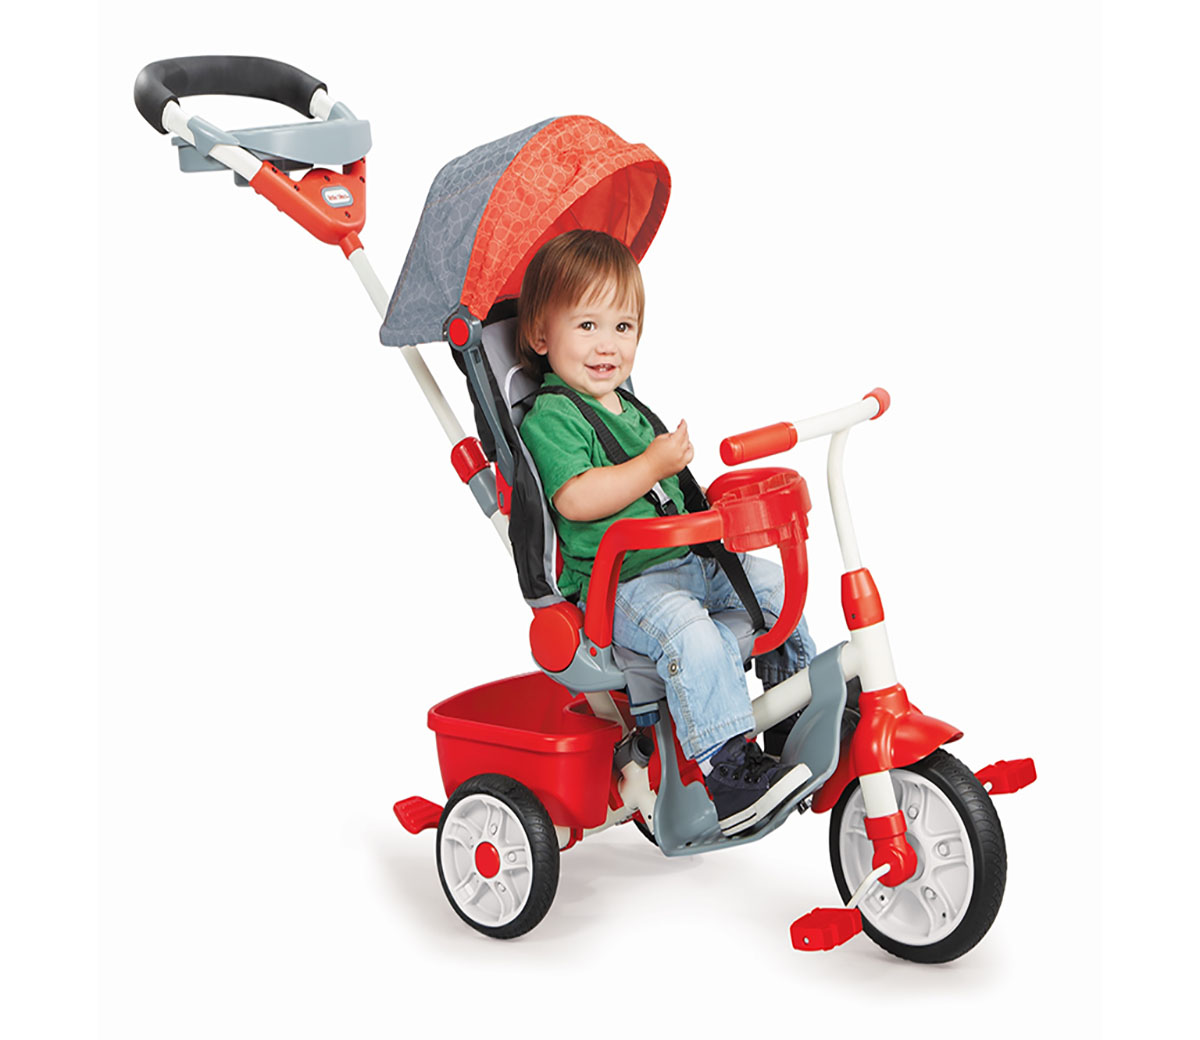 little tikes ride and relax trike